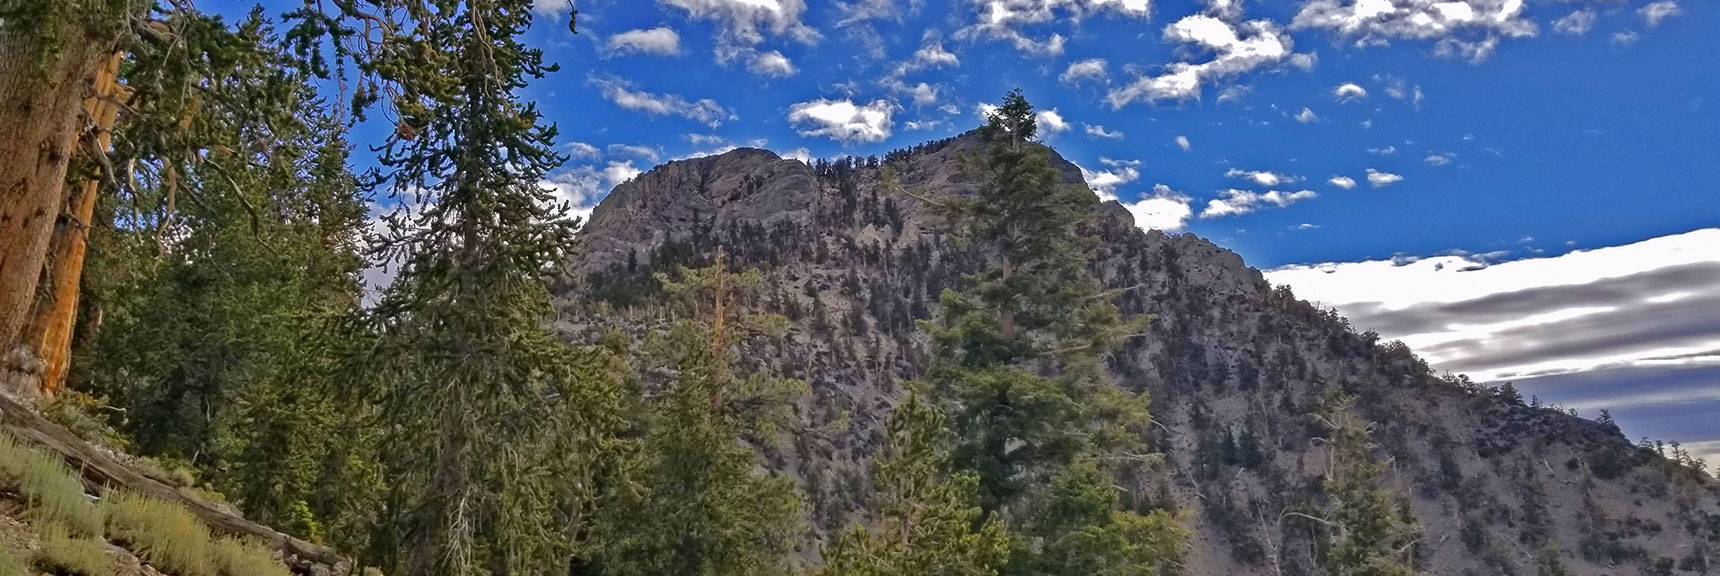 Fuller View of The Sisters South While Nearing 9,200ft on the Ridge. | The Sisters South | Lee Canyon | Mt Charleston Wilderness | Spring Mountains, Nevada